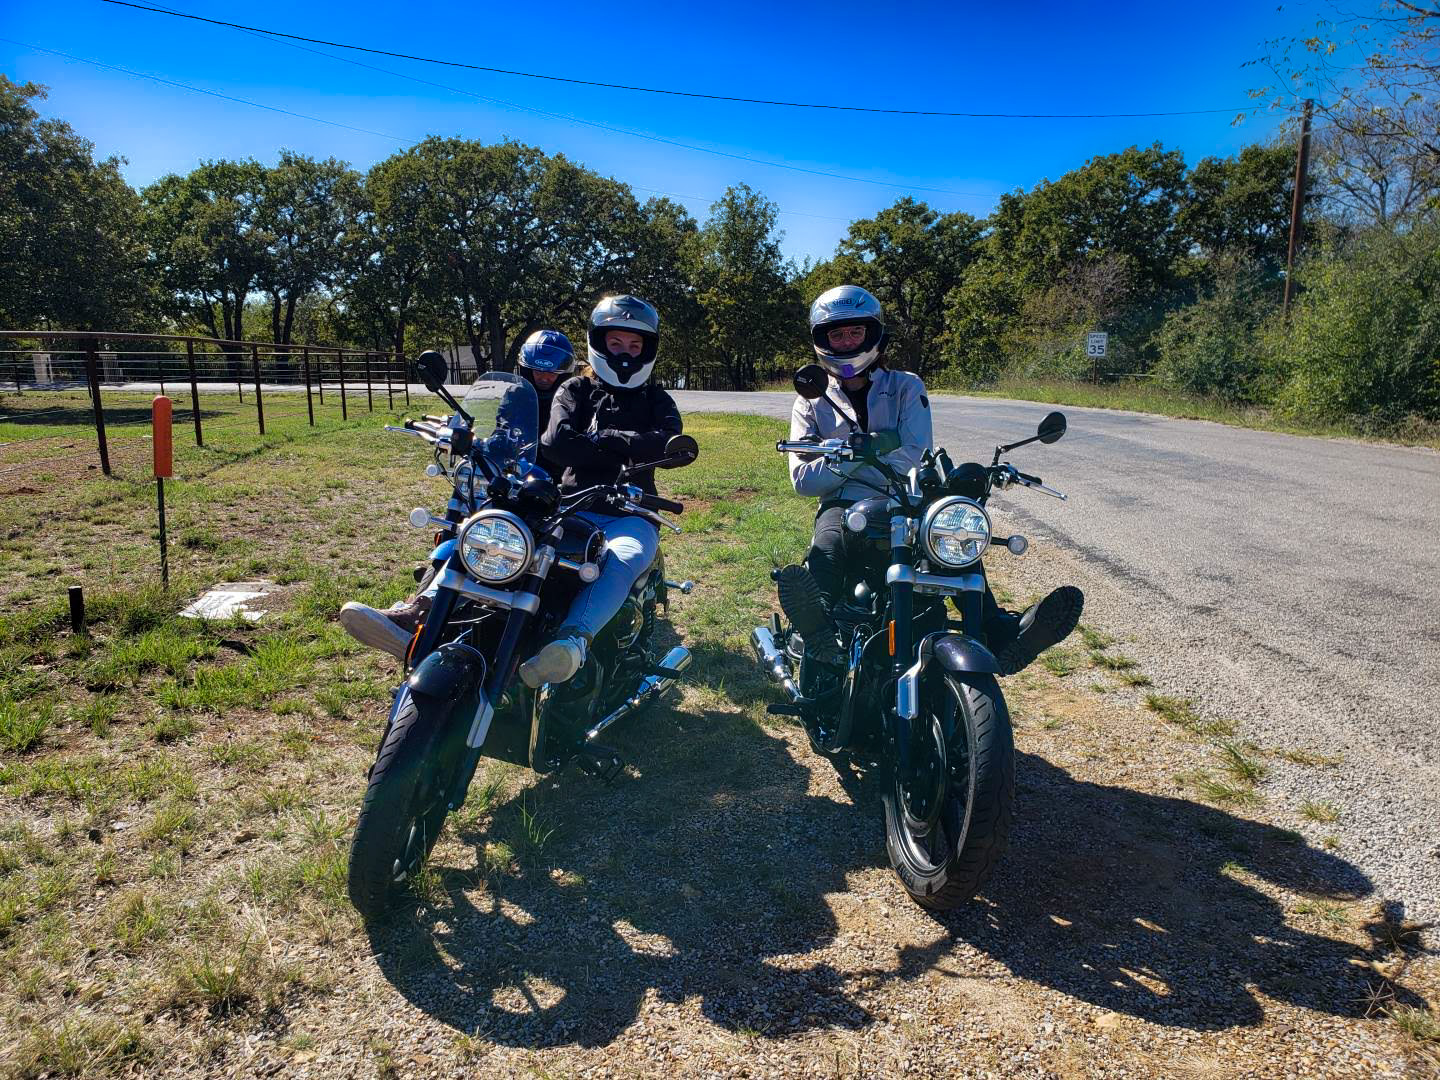 A view of Royal Enfield’s new-to-America Super Meteor 650, with myself and Steve Dasilva from Jalopnik. Utter ragamuffins, the lot. All rights reserved.